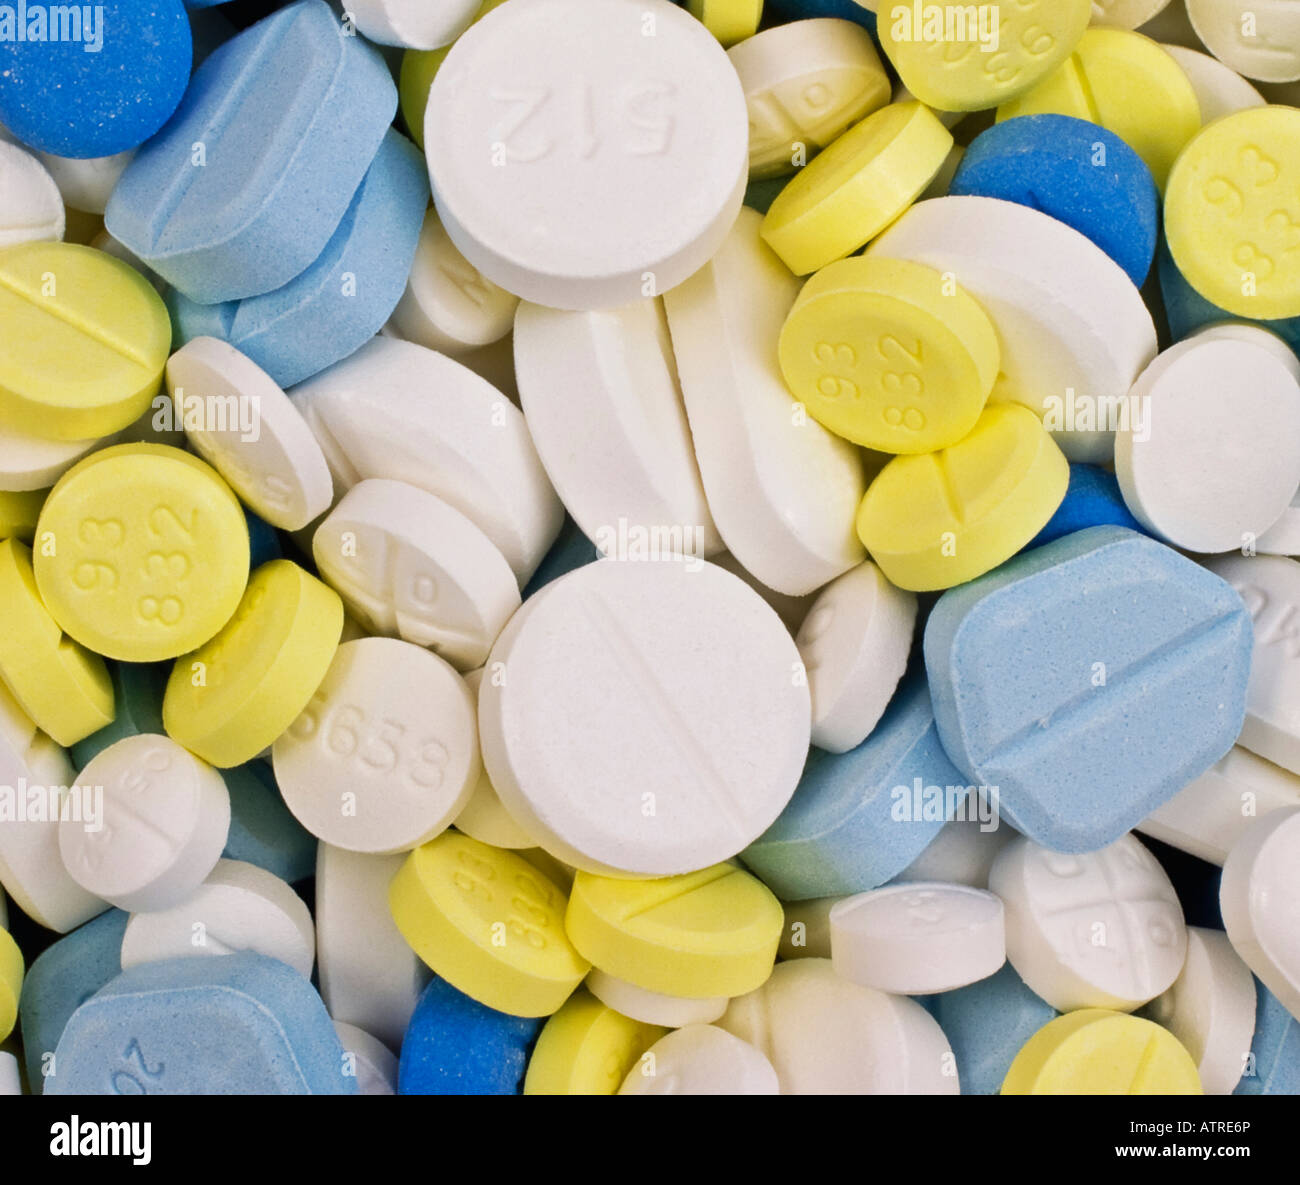 Psychiatric drugs and painkillers Stock Photo